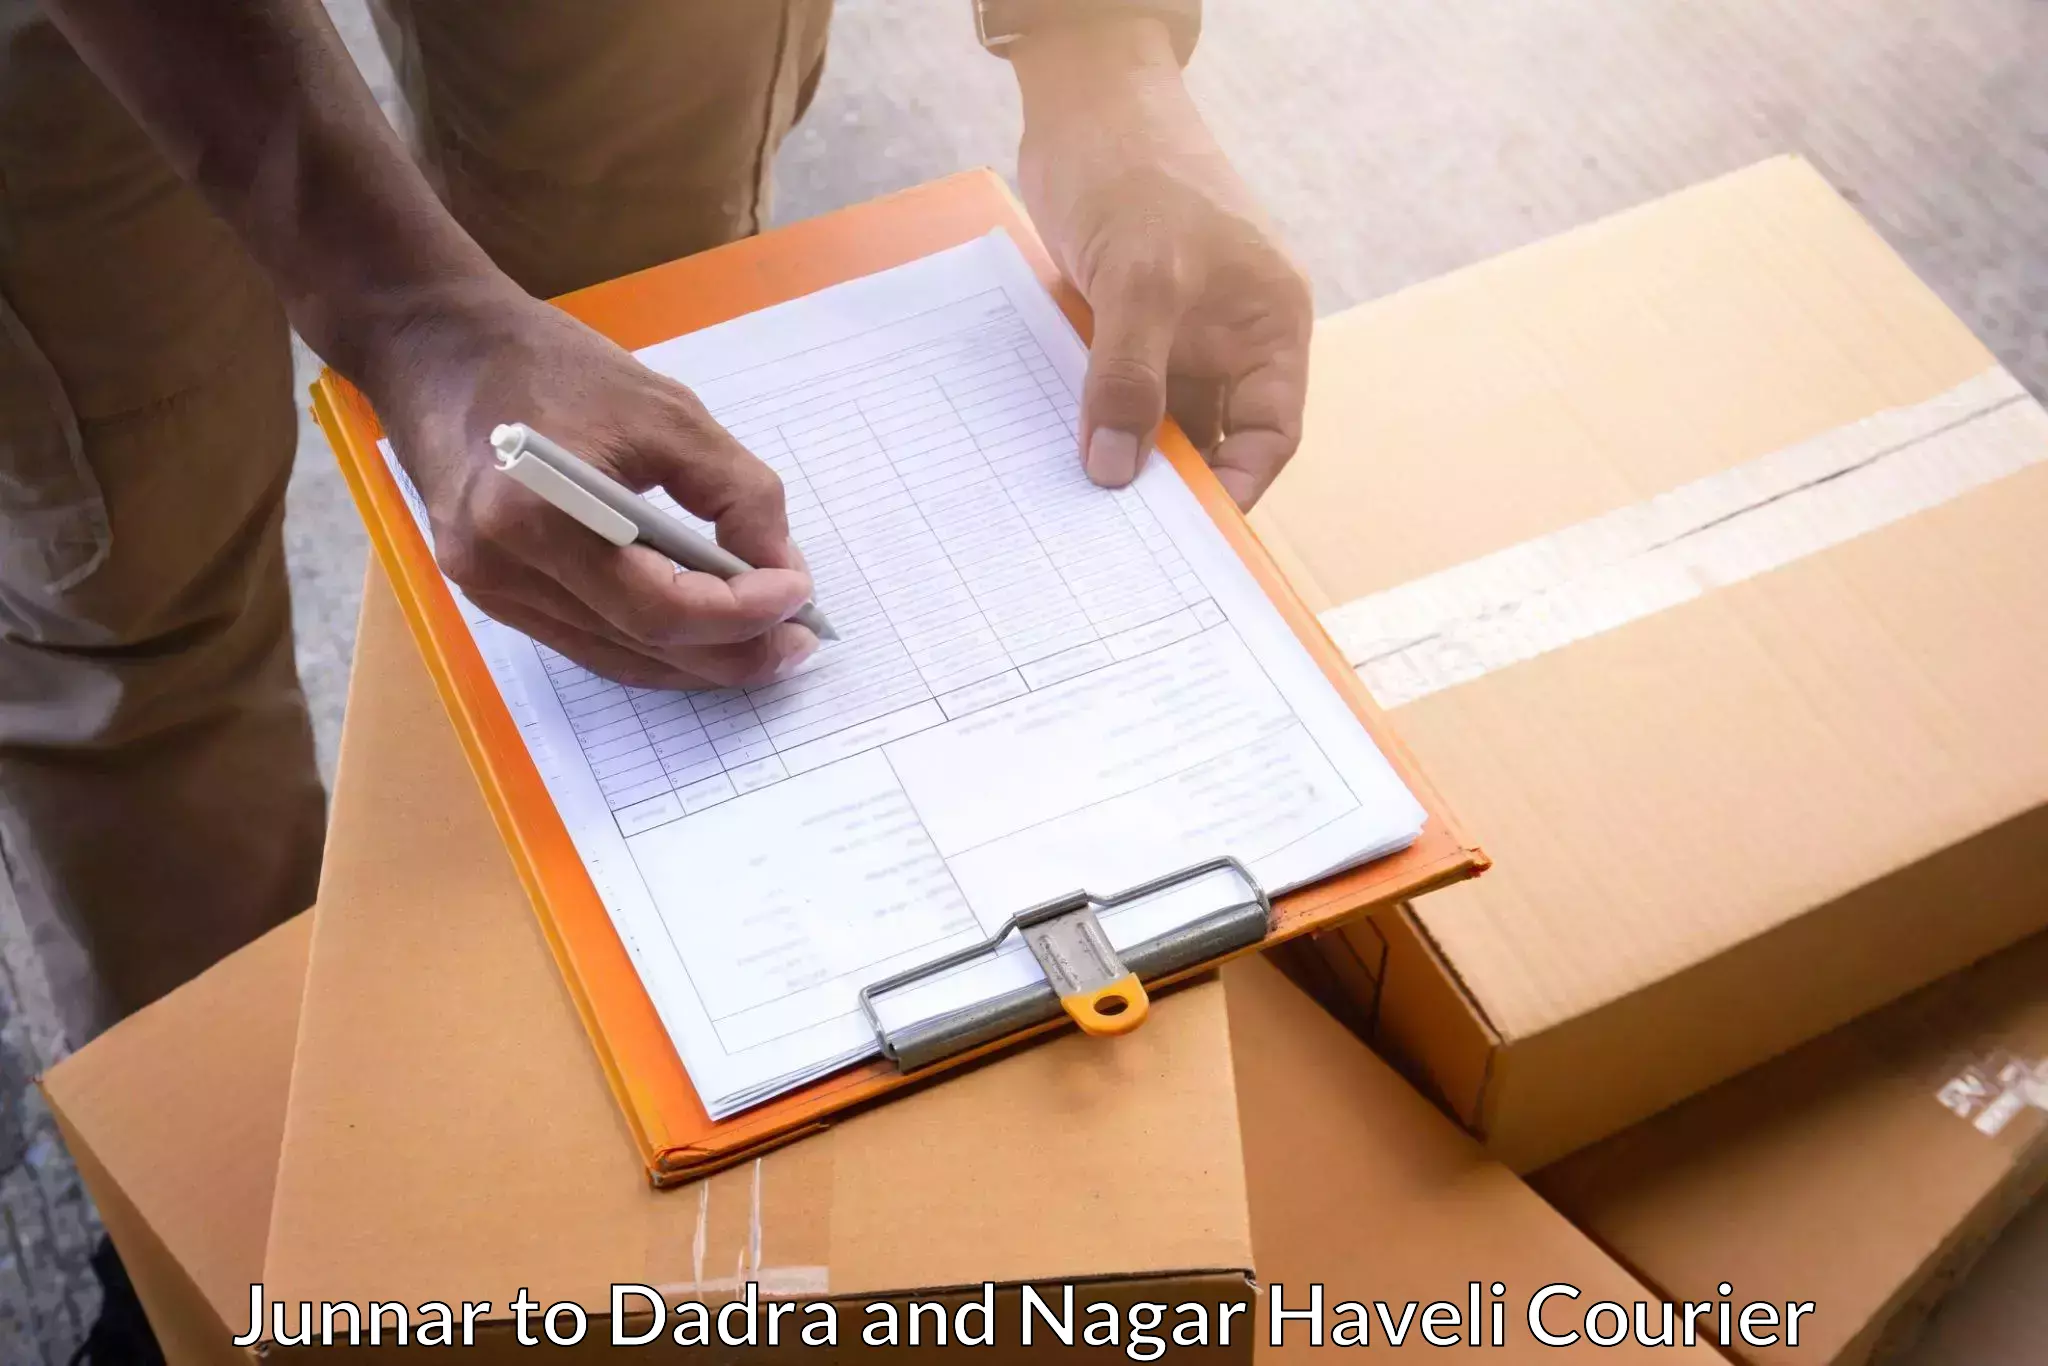 Express delivery capabilities Junnar to Dadra and Nagar Haveli